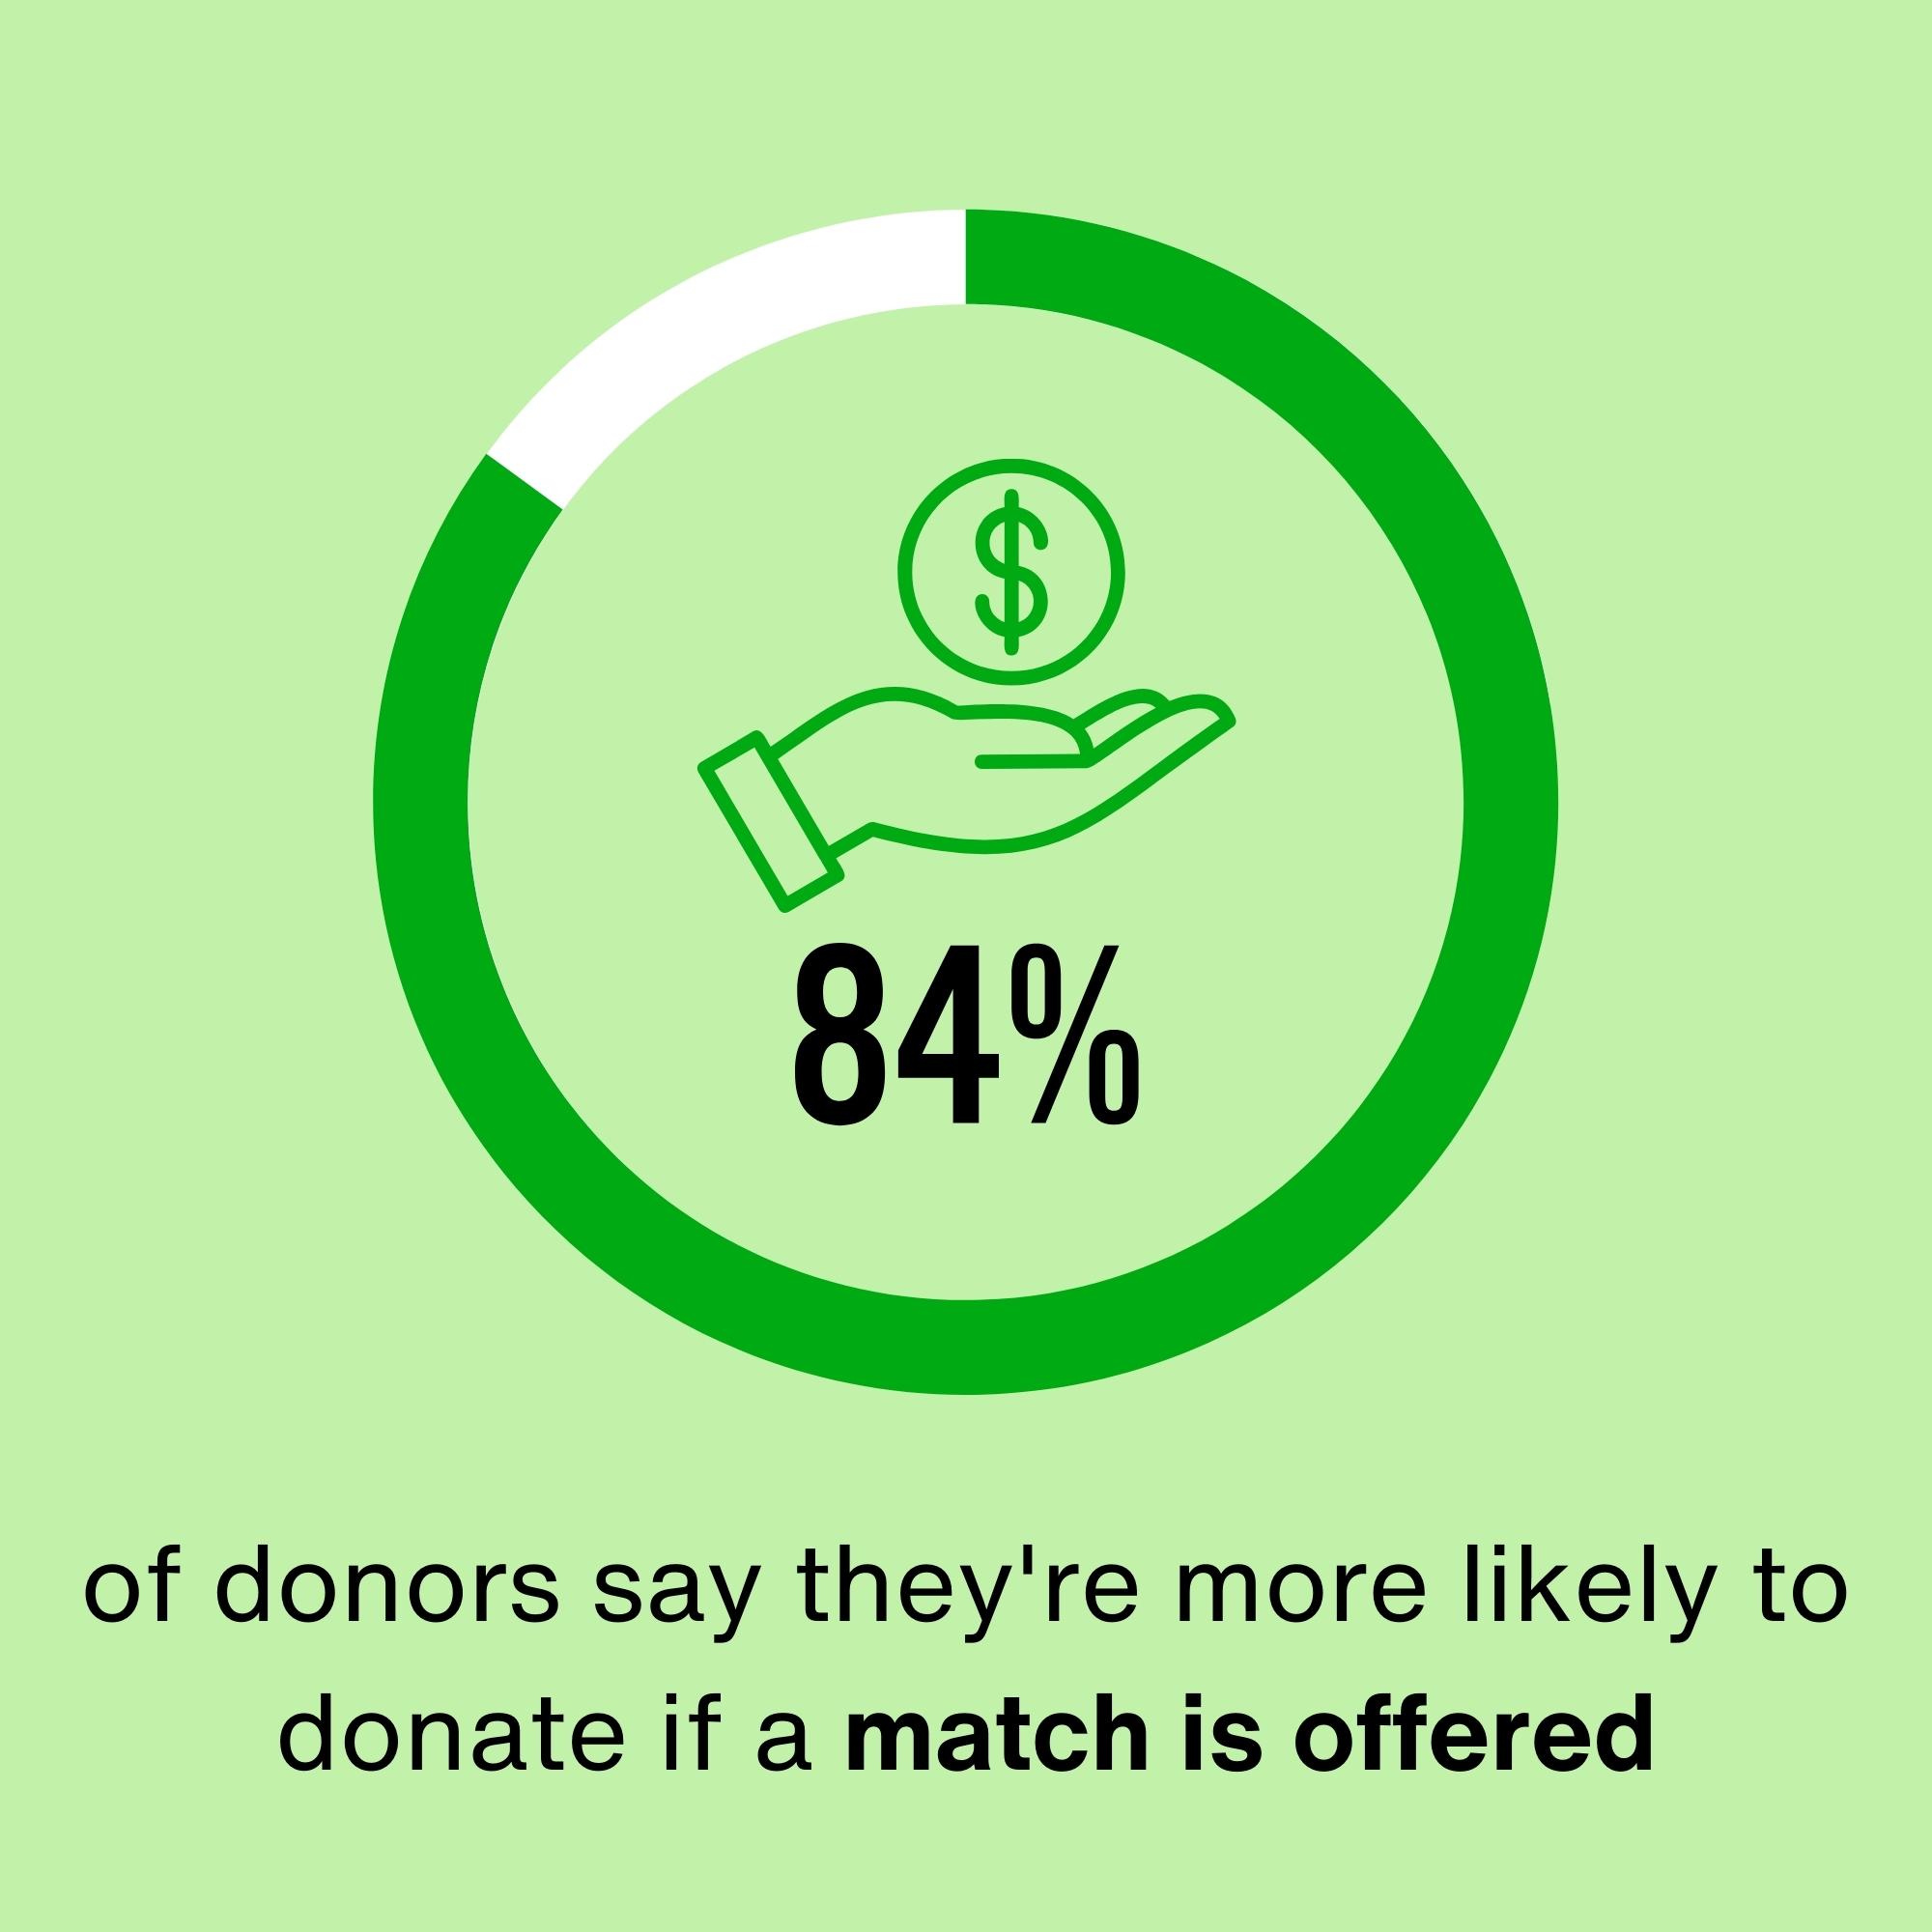 84% of donors say they're more likely to donate if a match is offered